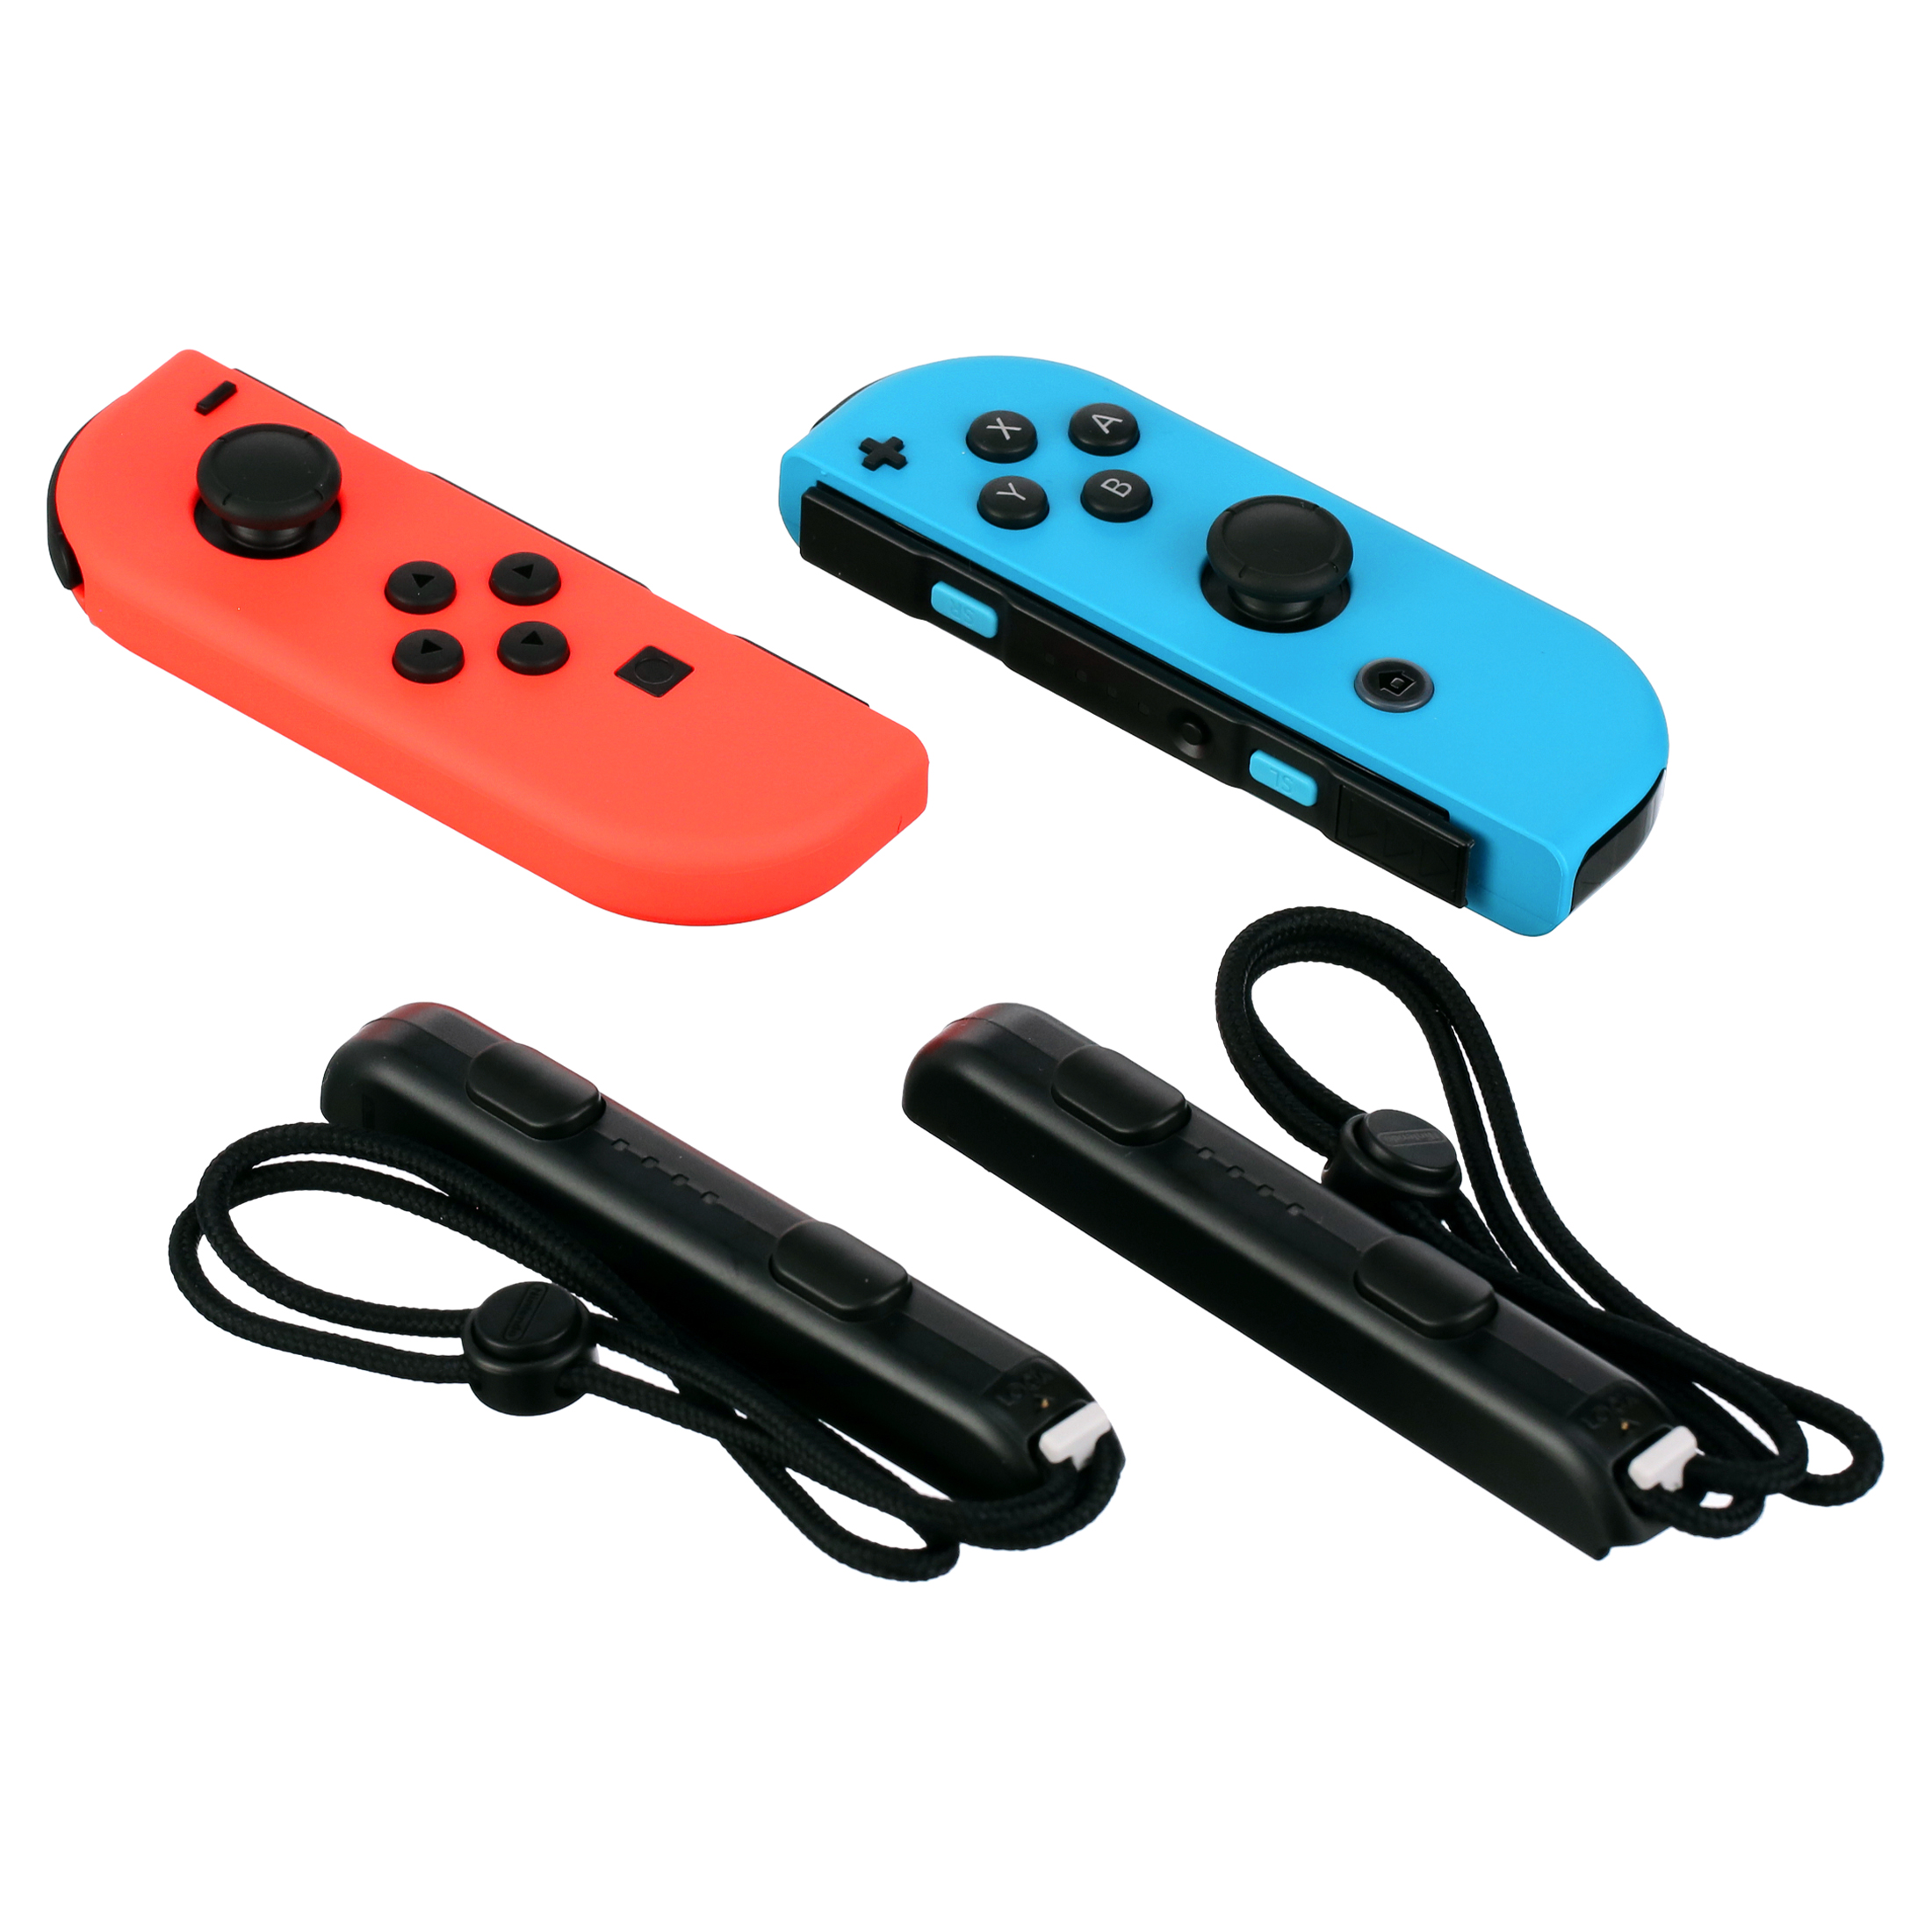 Nintendo Switch - Joy-Con (L/R) - Left Neon Red/ Right Neon Blue Controllers - image 3 of 6